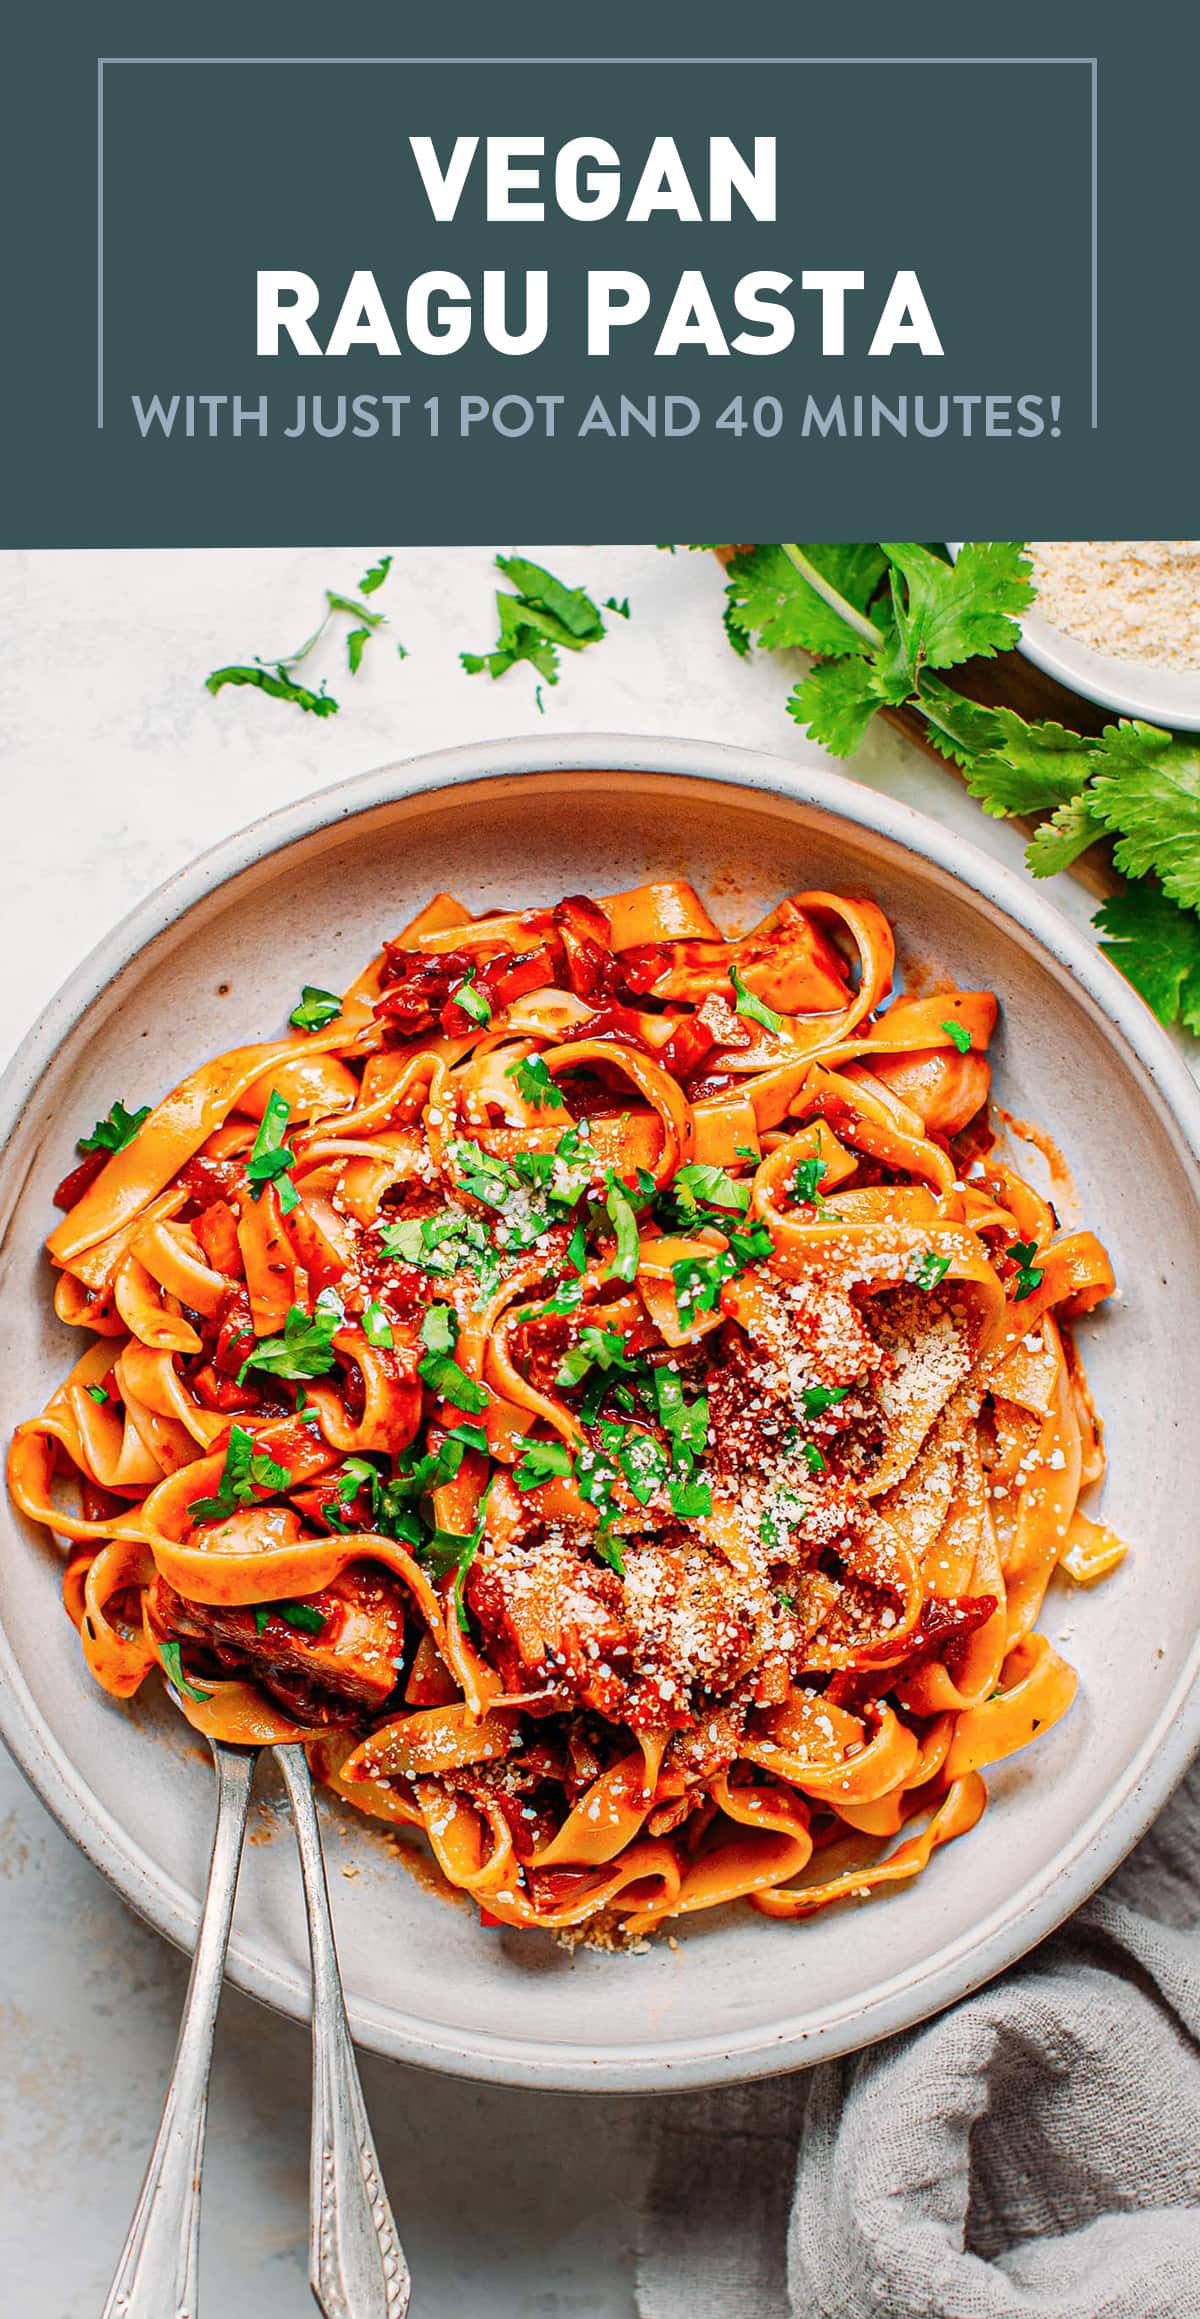 This Italian-inspired pasta features juicy jackfruit cooked in a rich and garlicky red wine tomato sauce! Plant-based, 1 pot, and just 40 minutes required! #ragu #plantbased #pasta #vegan